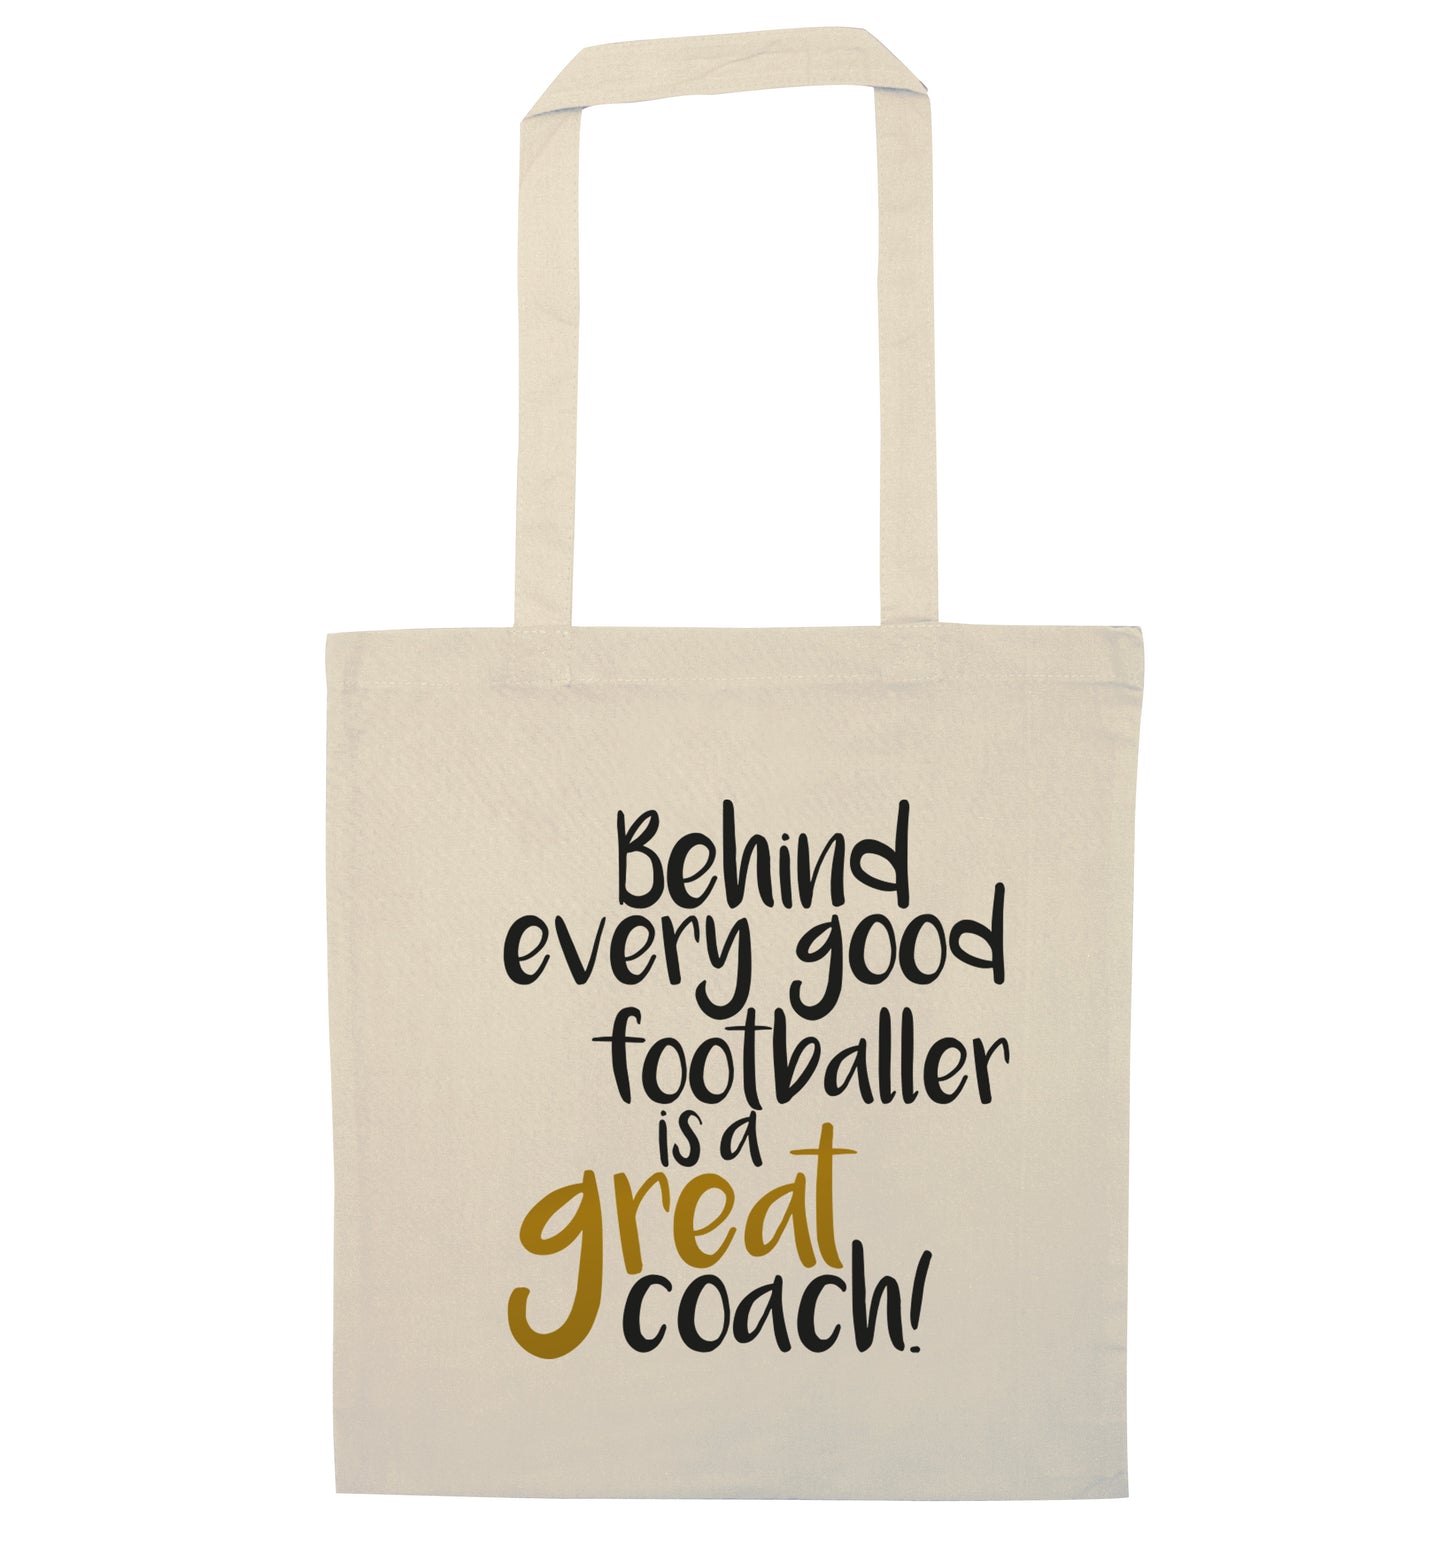 Behind every good footballer is a great coach! natural tote bag